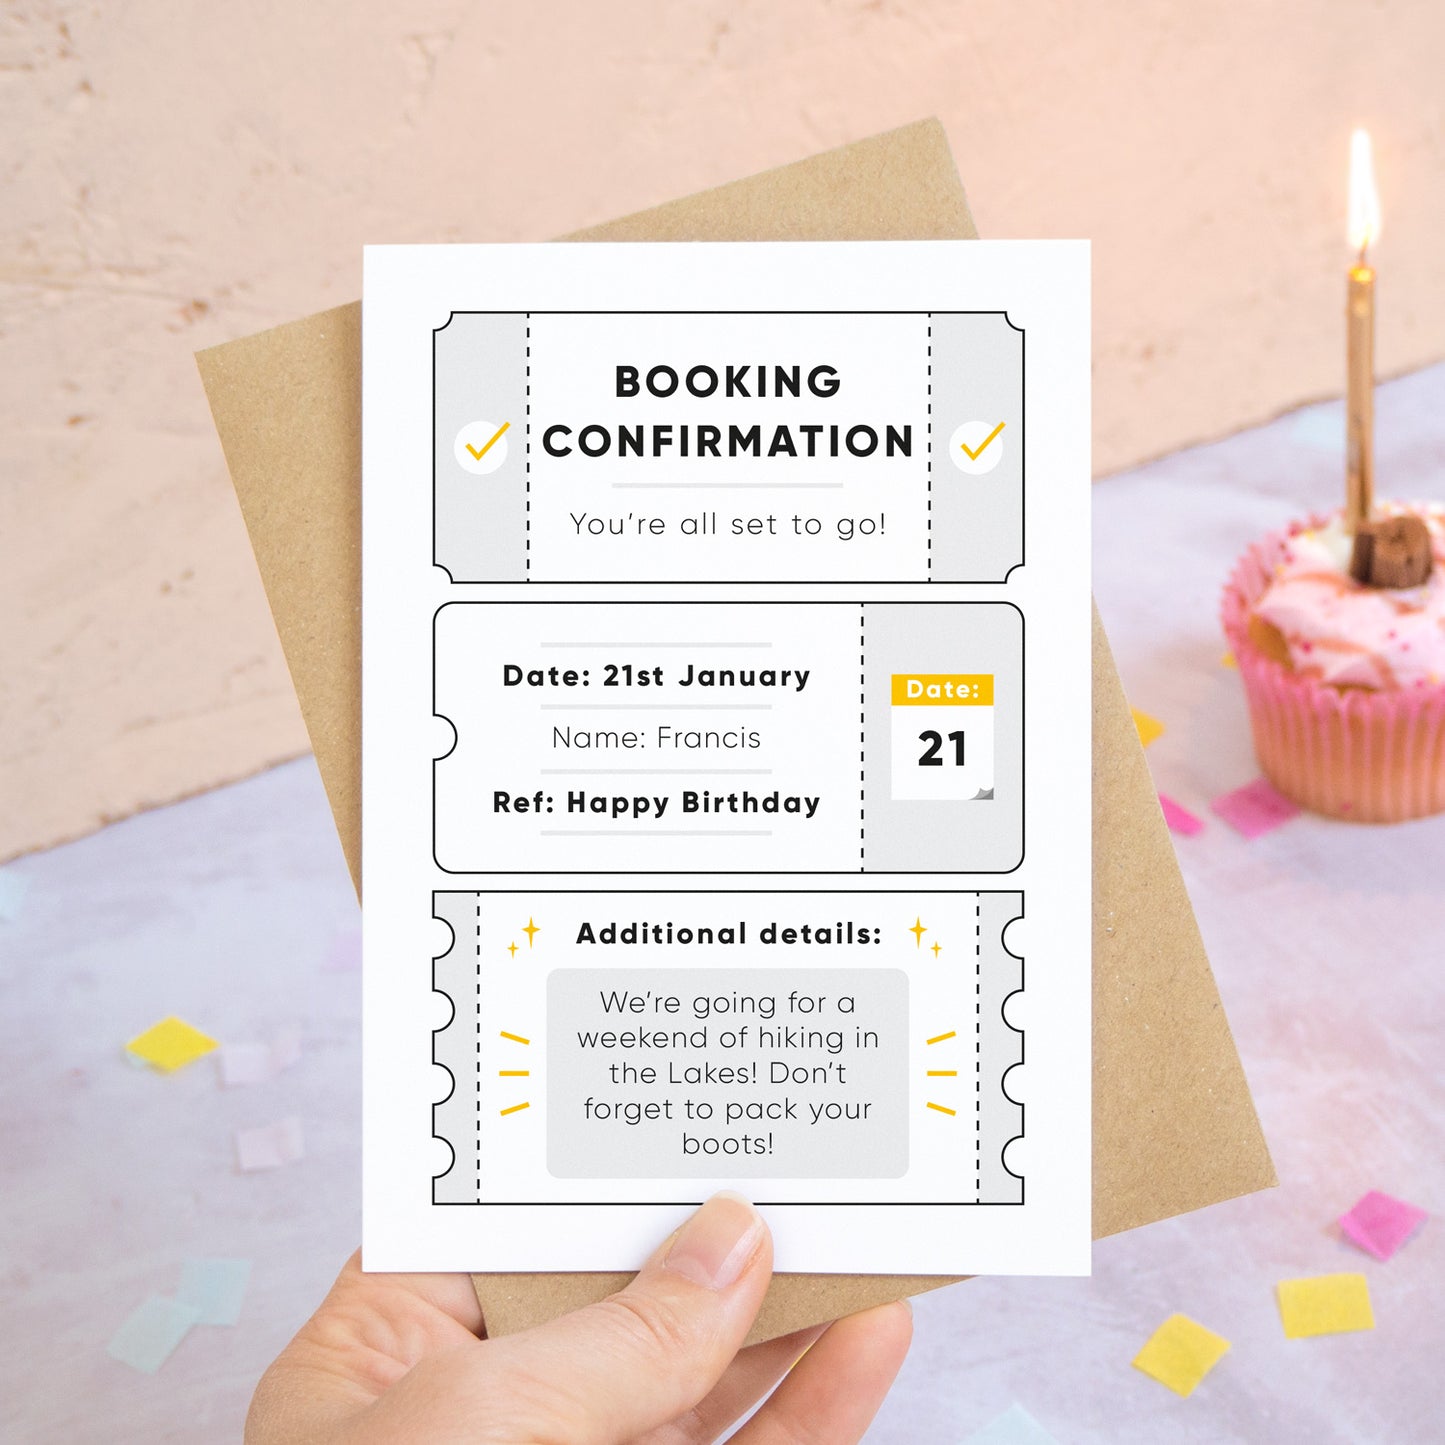 A personalised birthday booking confirmation gift card held in front of a peach and grey background scattered with birthday confetti and a cup cake with a lit candle. Pictured is the grey version of the card.